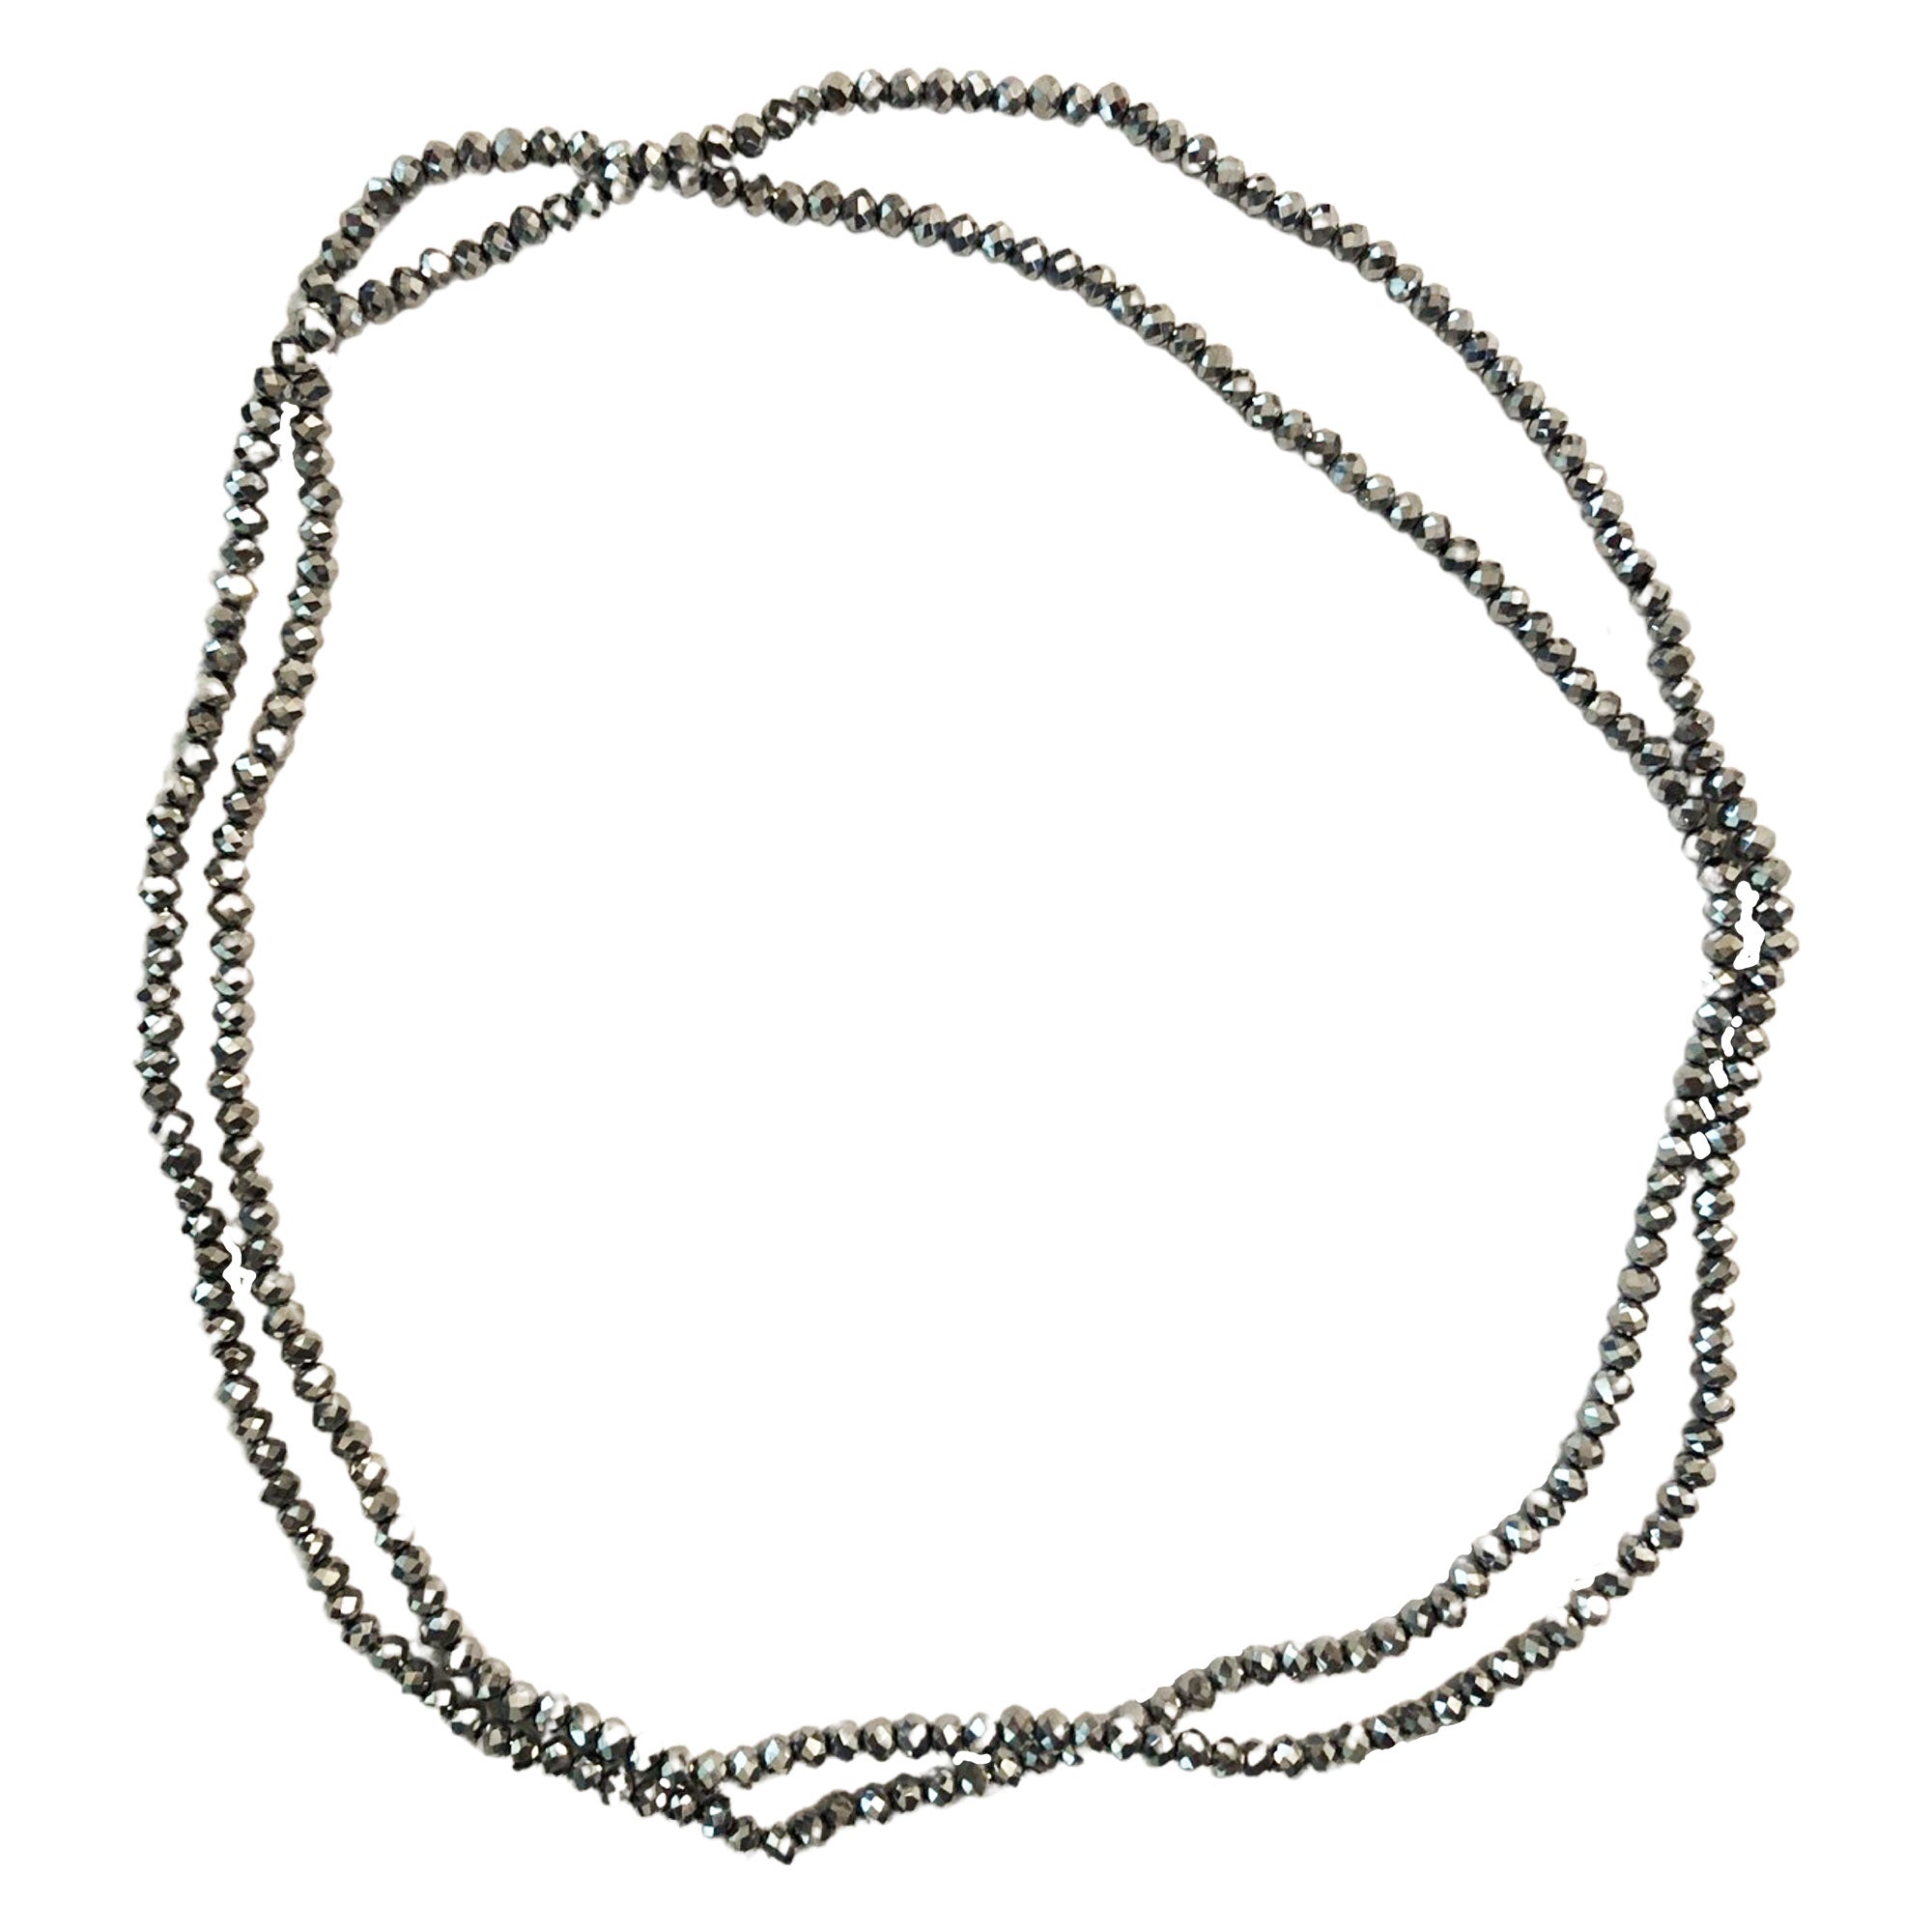 CLEARANCE CRYSTAL WRAP NECKLACES (CASE OF 120 - $0.50 / PIECE)  Wholesale Wrap Necklaces / Bracelets in Assorted Colors SKU: 70400-A-B-120